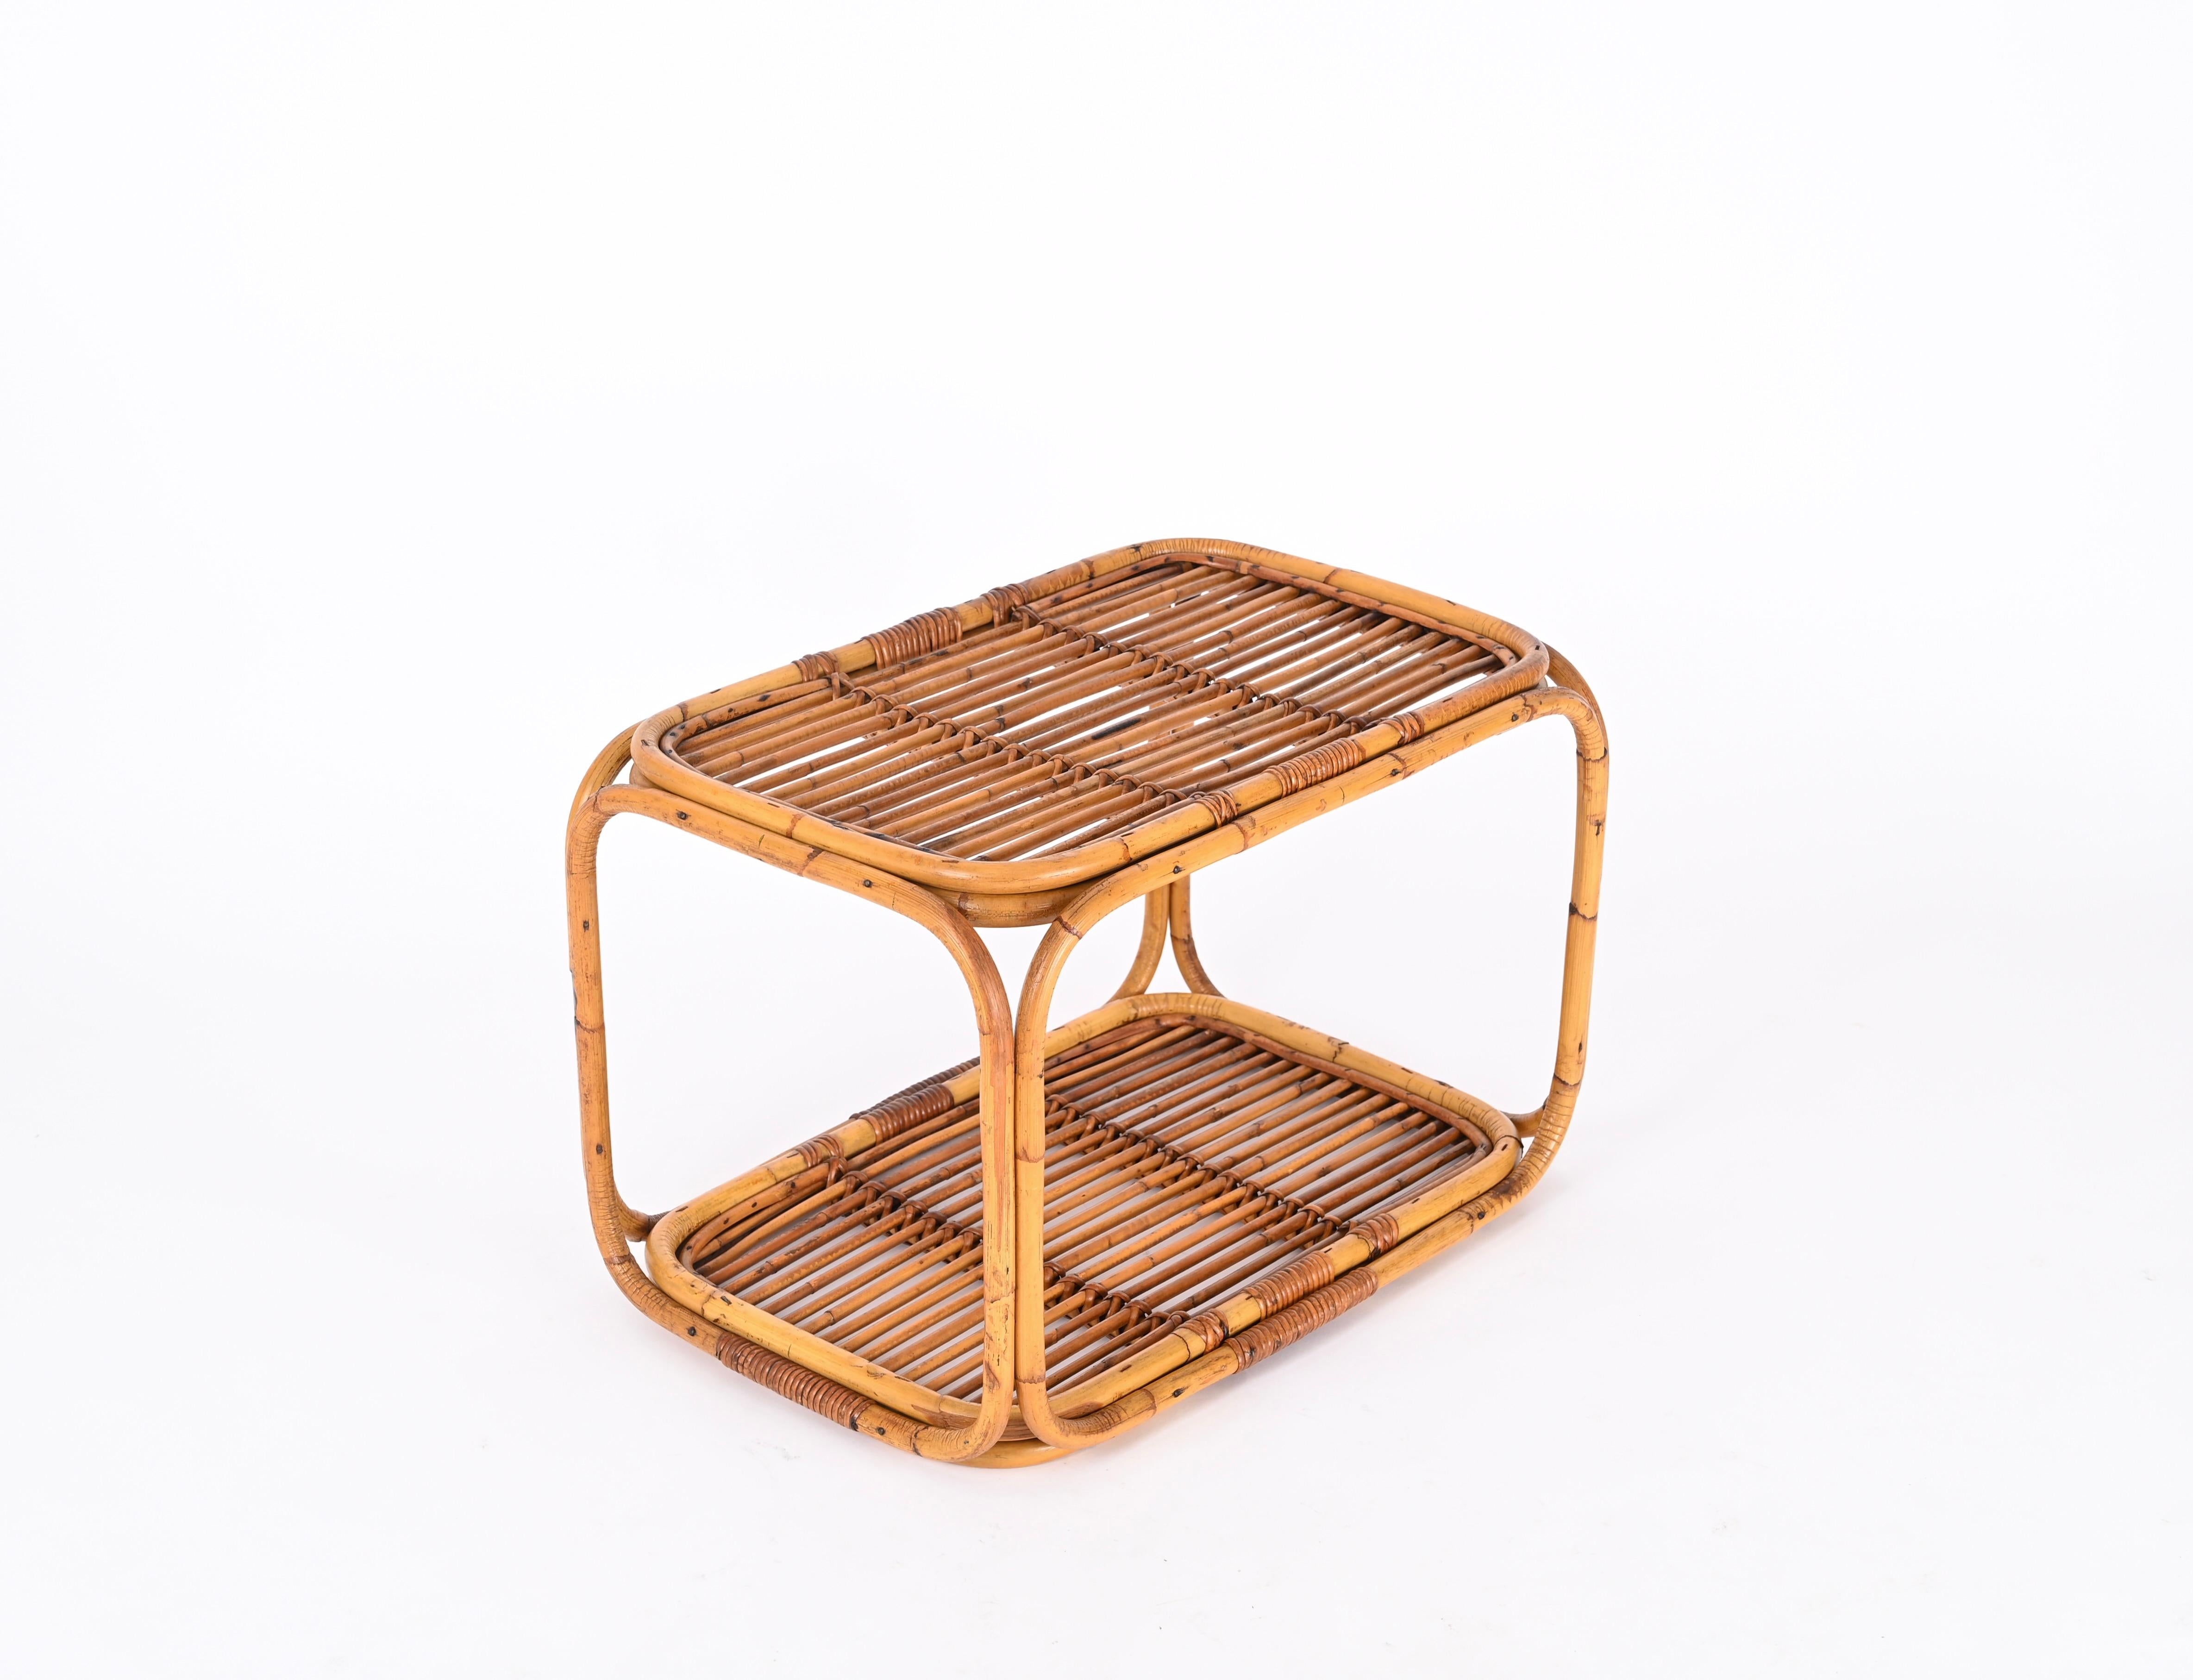 Midcentury Bamboo and Rattan Italian Rectangular Coffee Table, 1960s For Sale 1